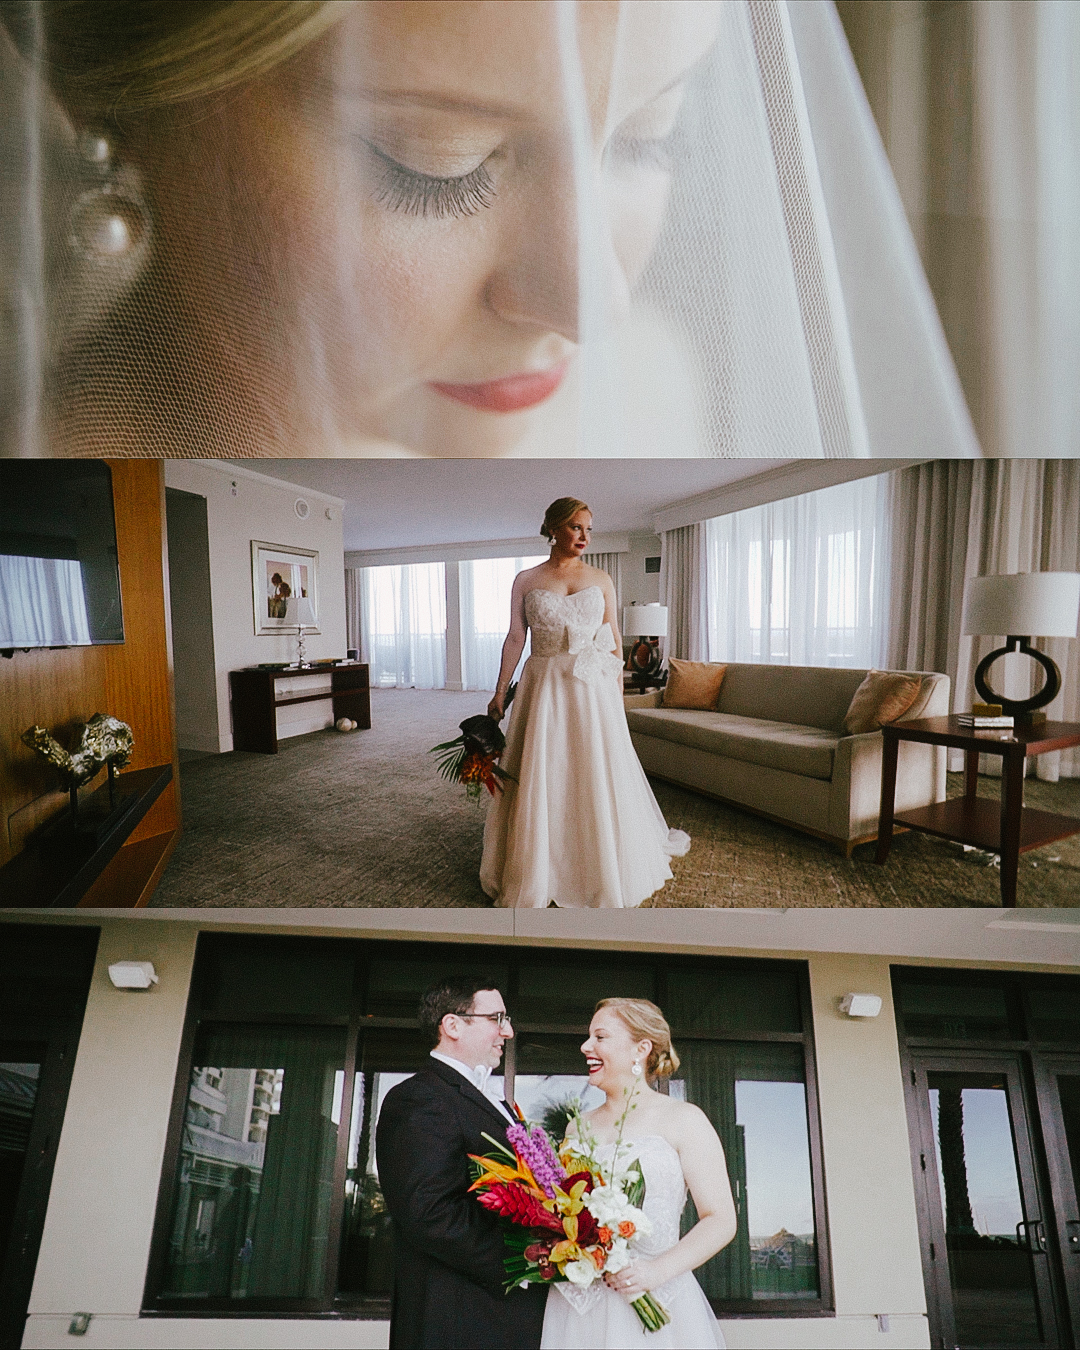 Mallory and Scott, wedding in Fort Lauderdale - image 1